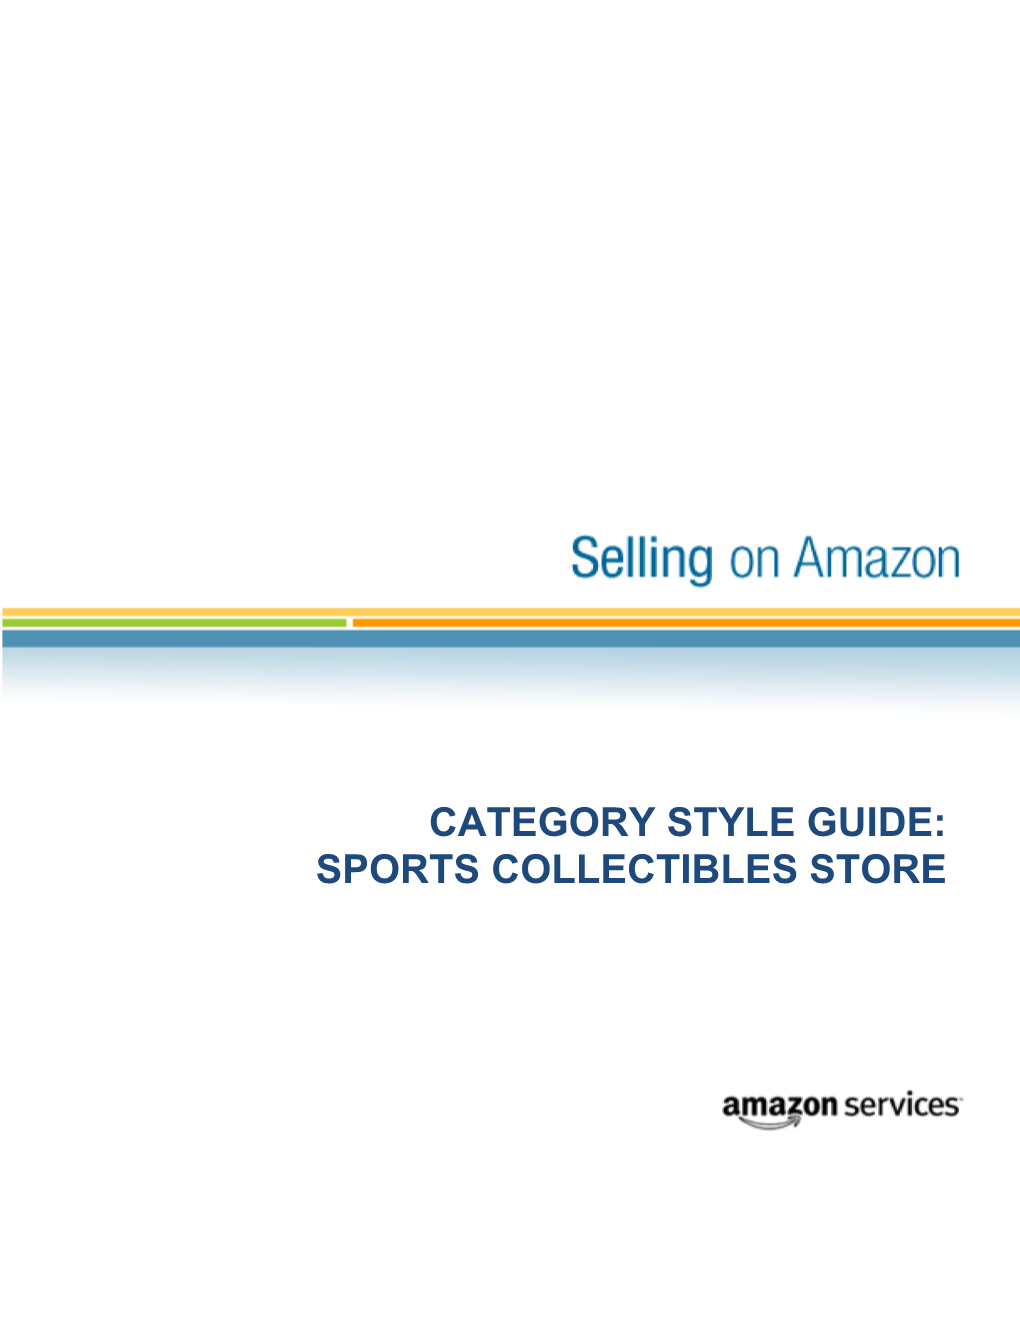 Category Style Guide: Sports Collectibles Store